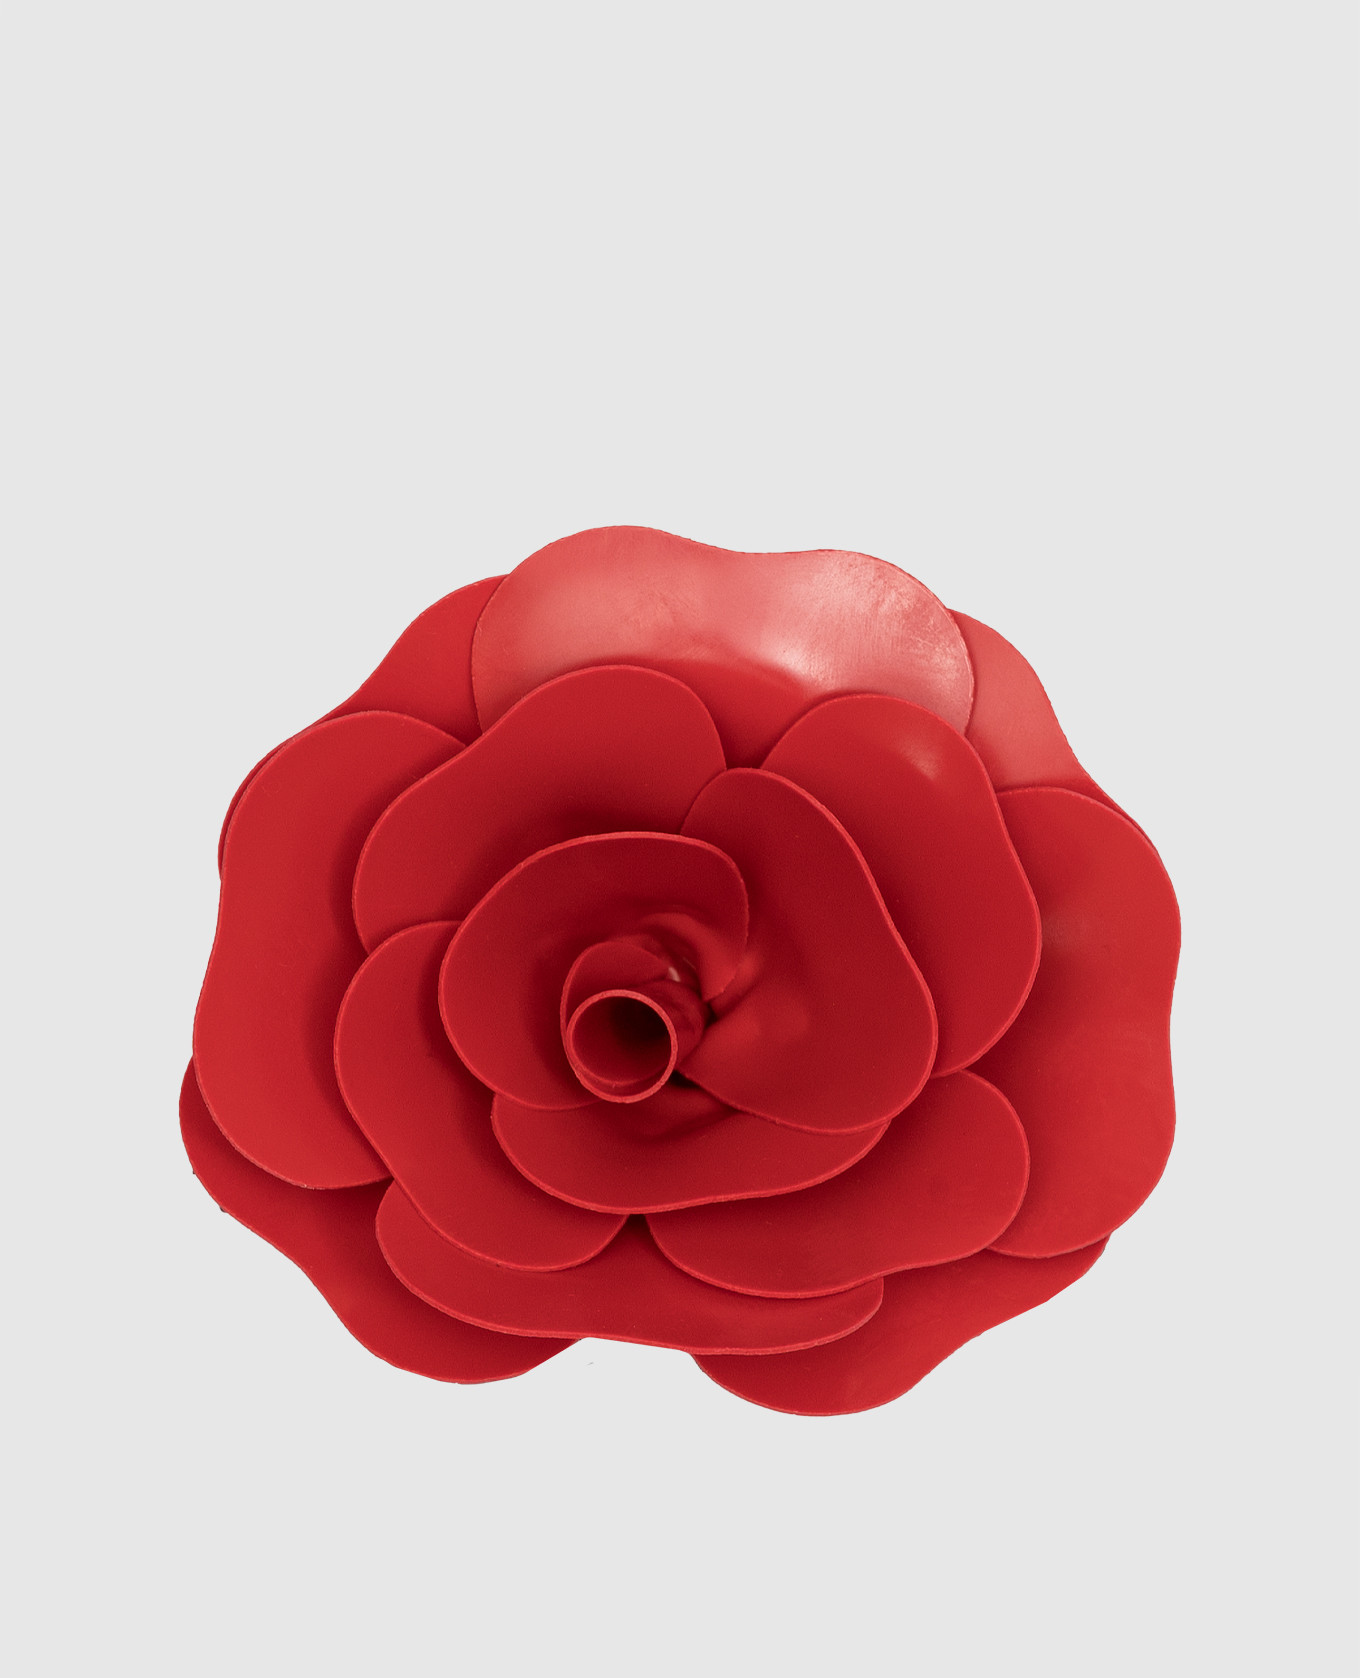 Red brooch in the form of a flower